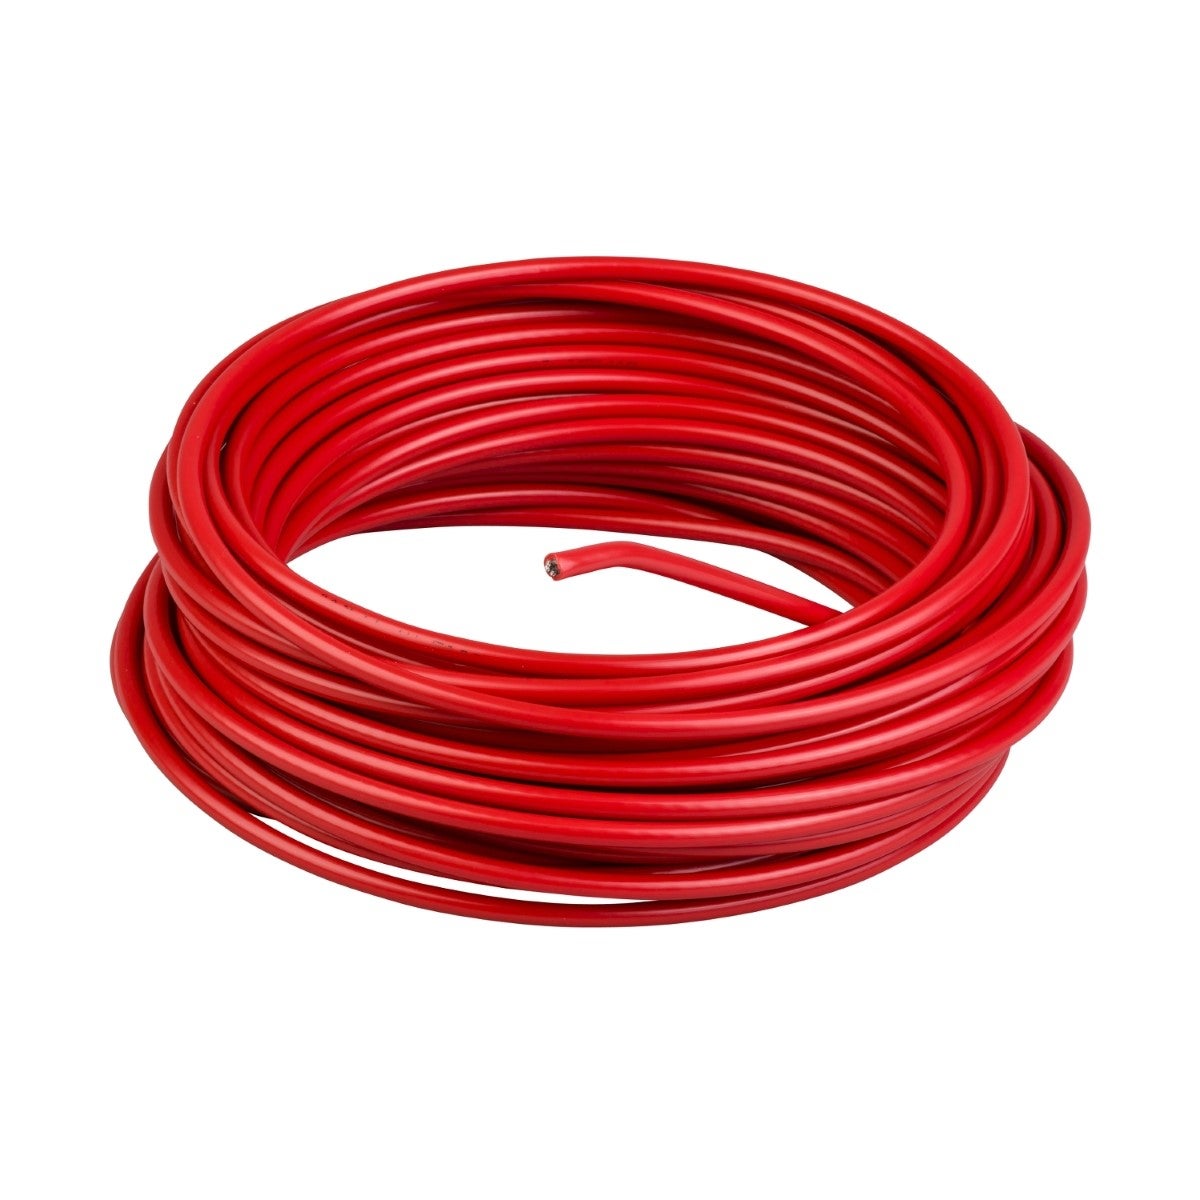 Telemecanique Emergency stop rope pull switches XY2C, red galvanised cable, Ø 5 mm, L 50.5 m, for XY2C